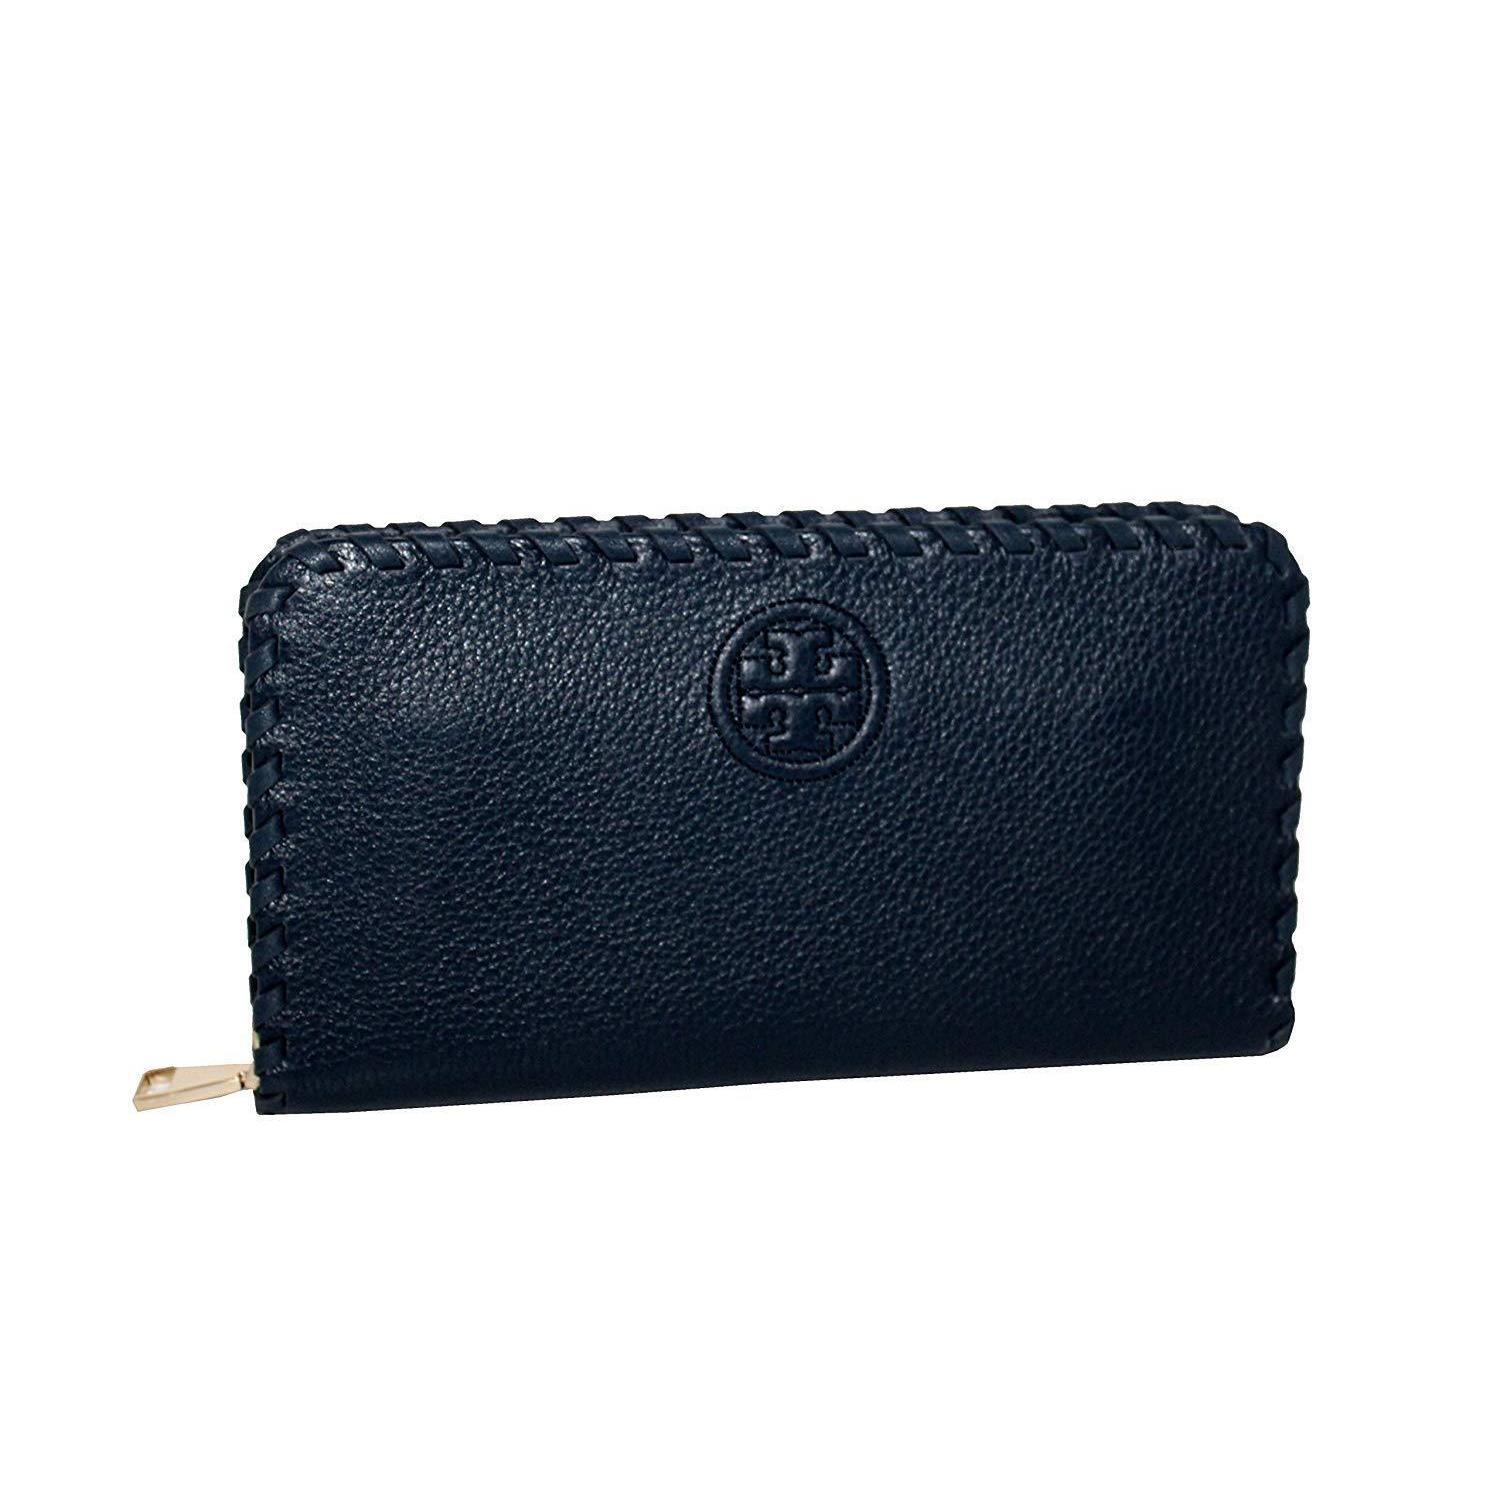 Tory Burch Womens Dark Blue Leather Marion Multi Zip Continental Wallet 18621-1